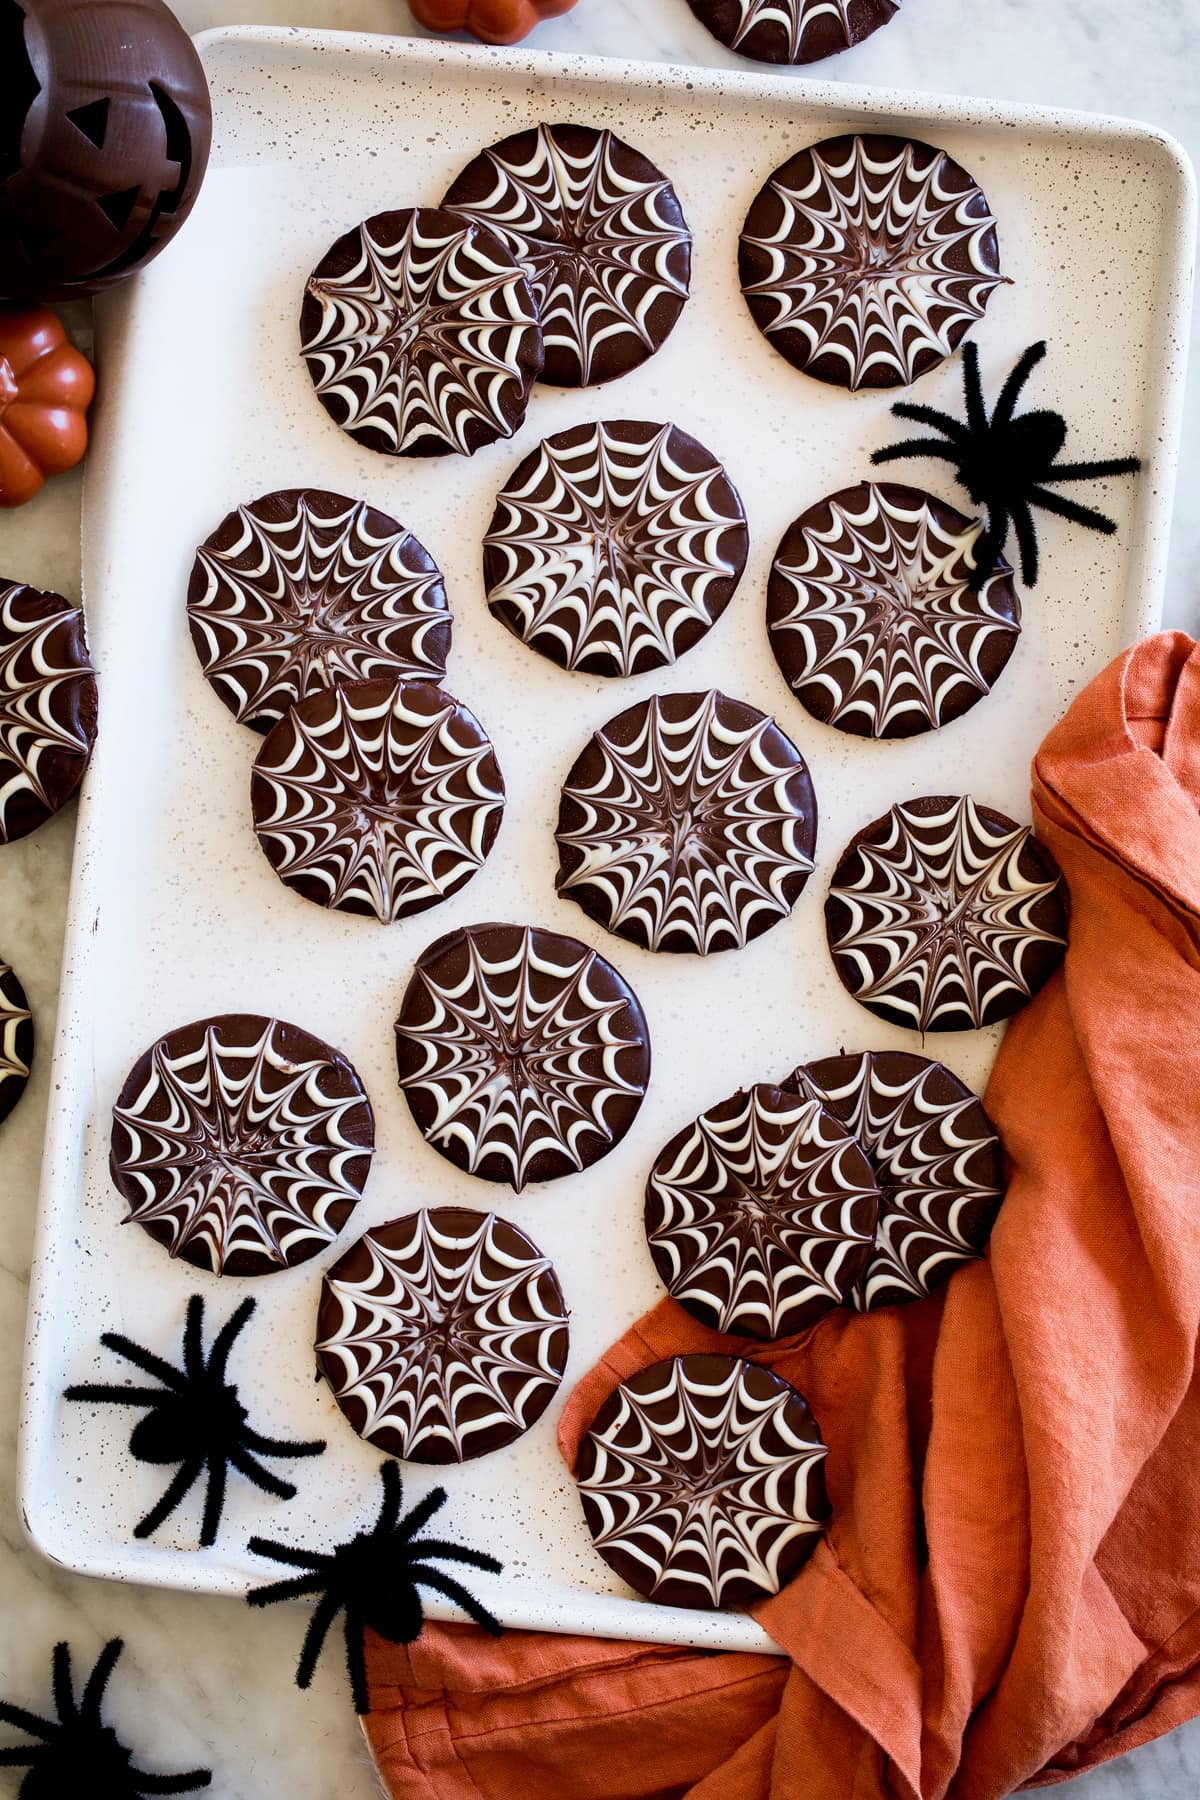 Chocolate spiderweb halloween cookies shown from above.